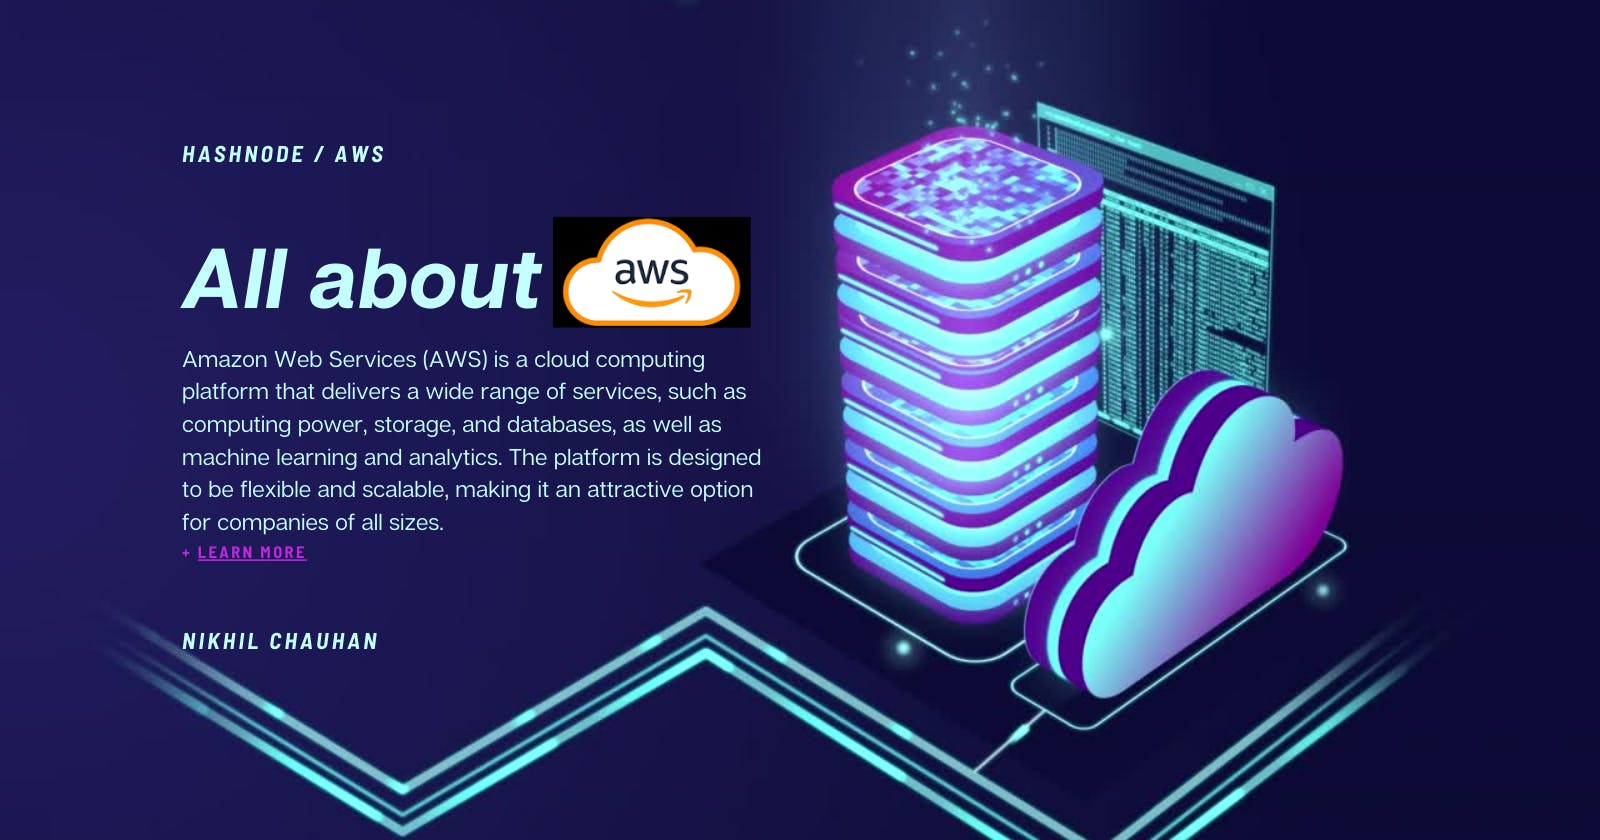 All about AWS